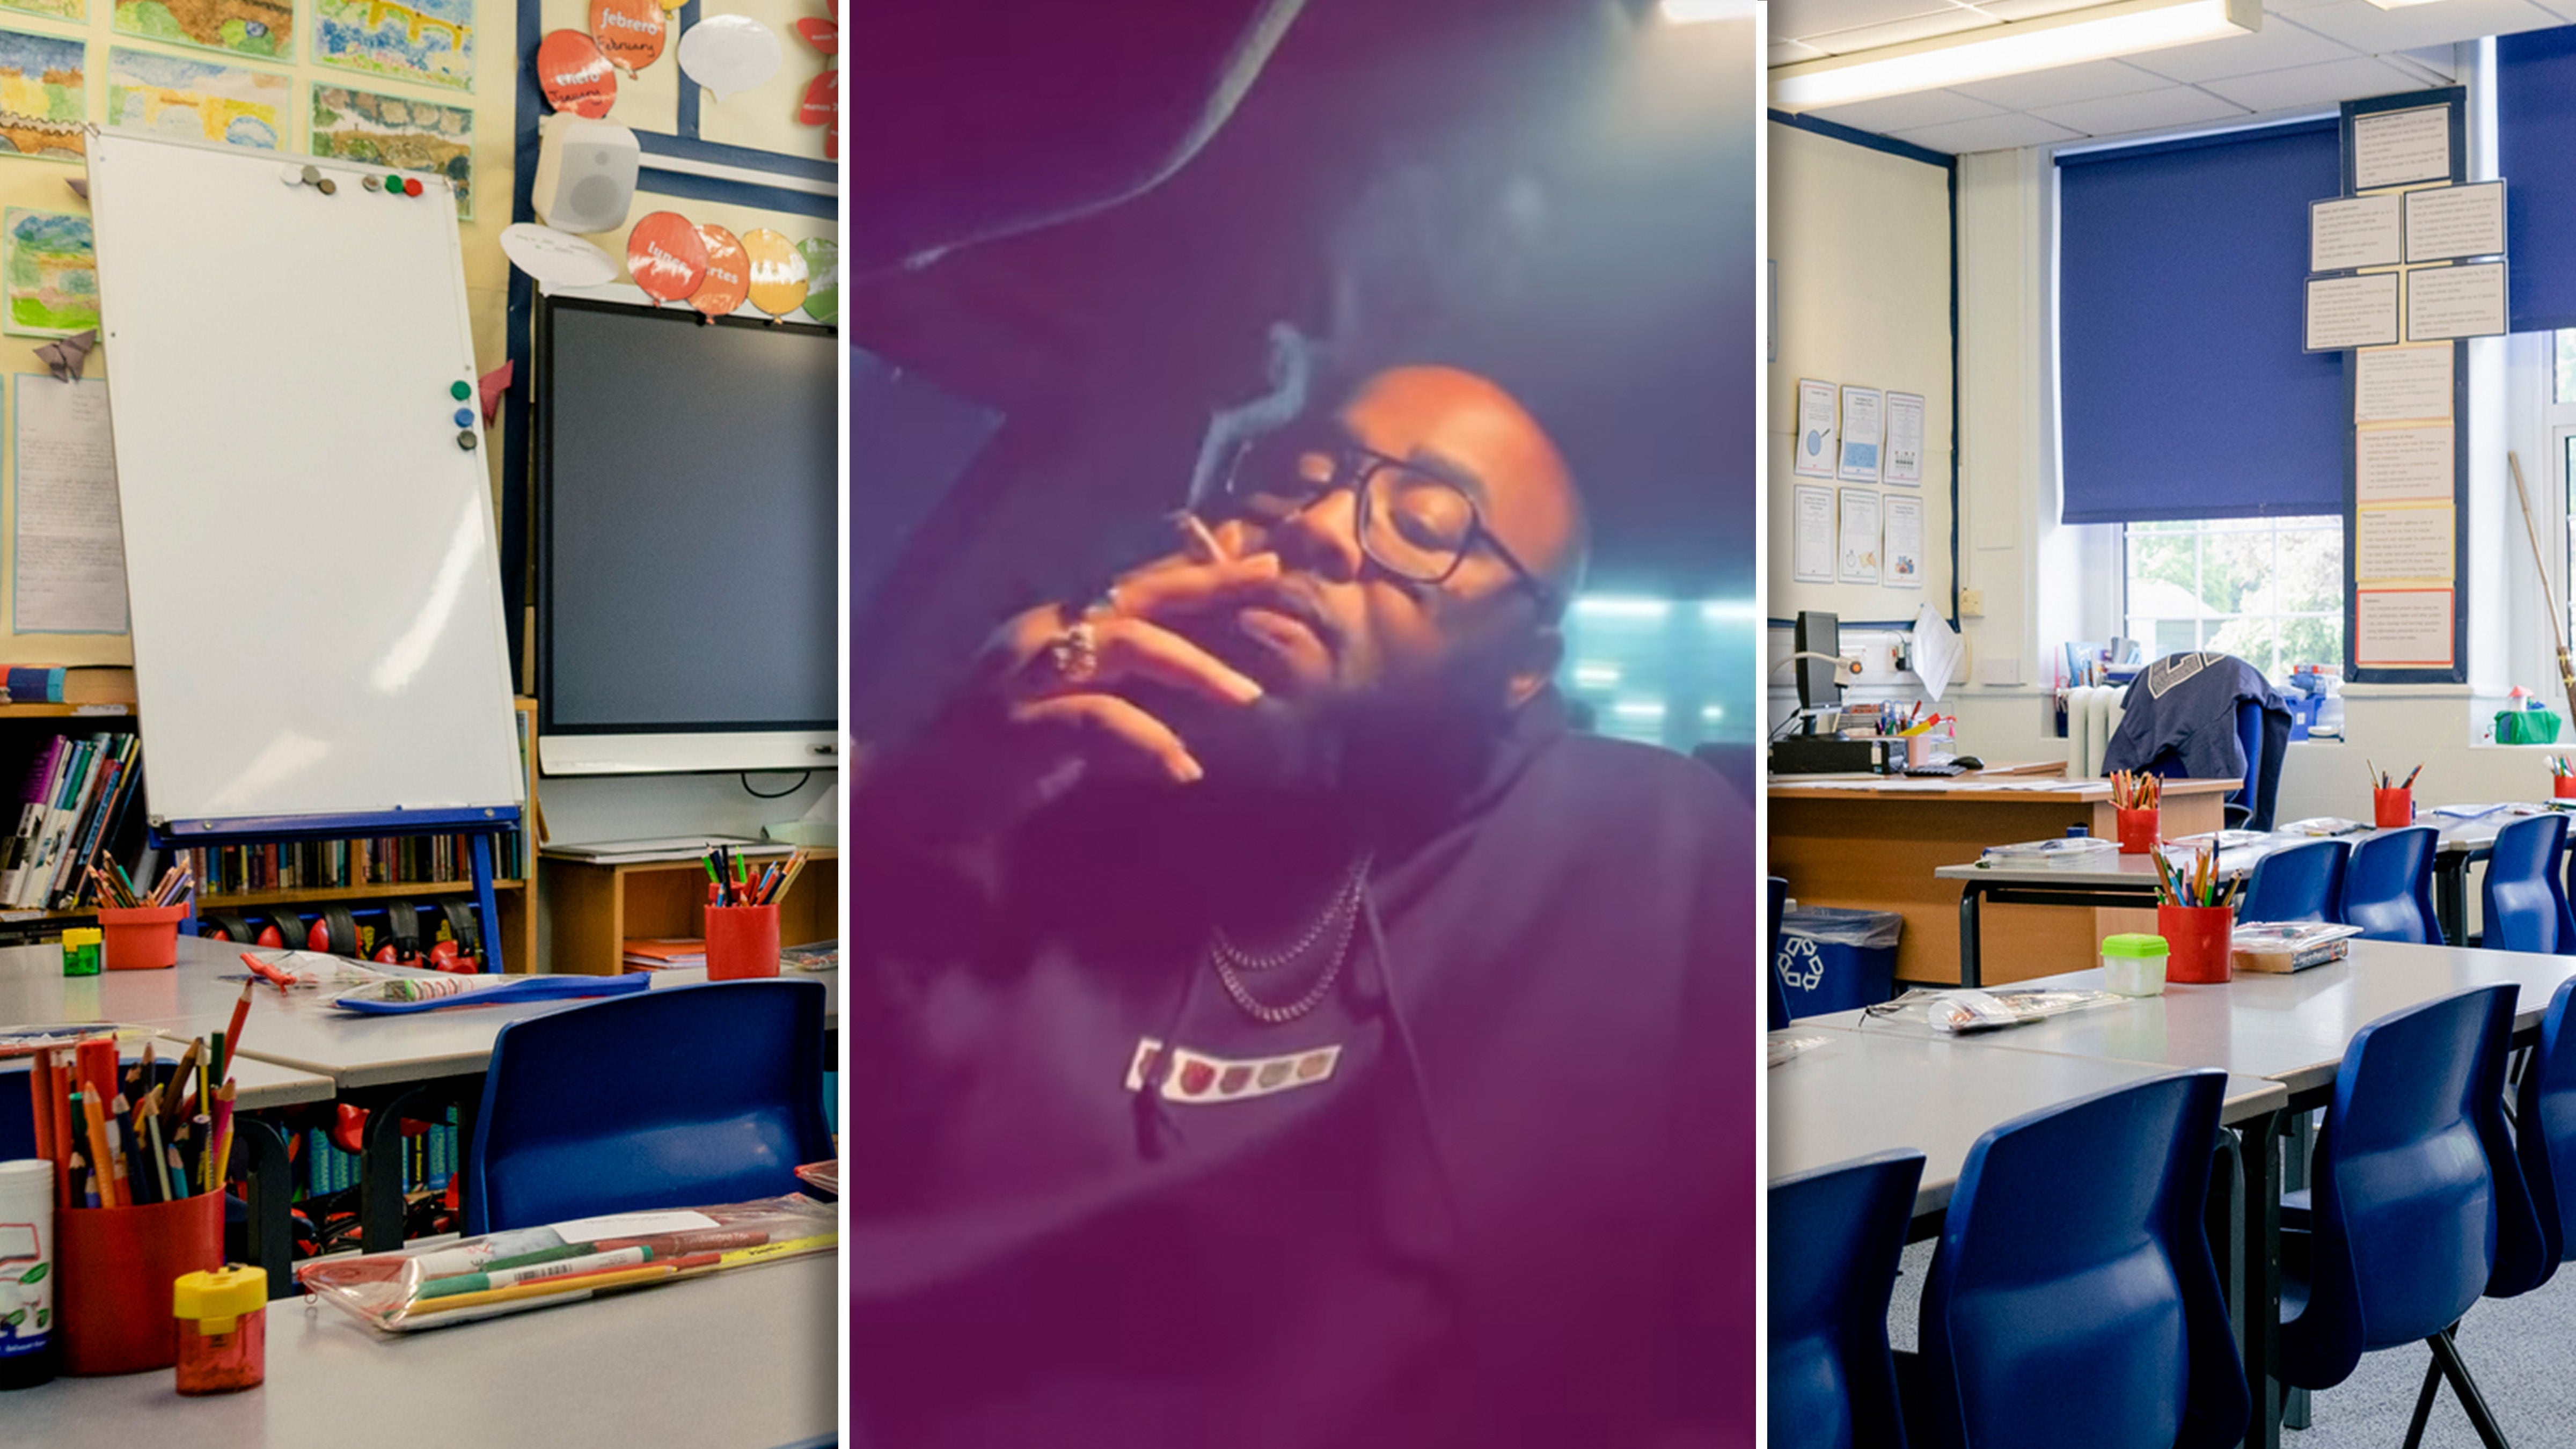 Seattle principal under fire for sexual content on Instagram account: report